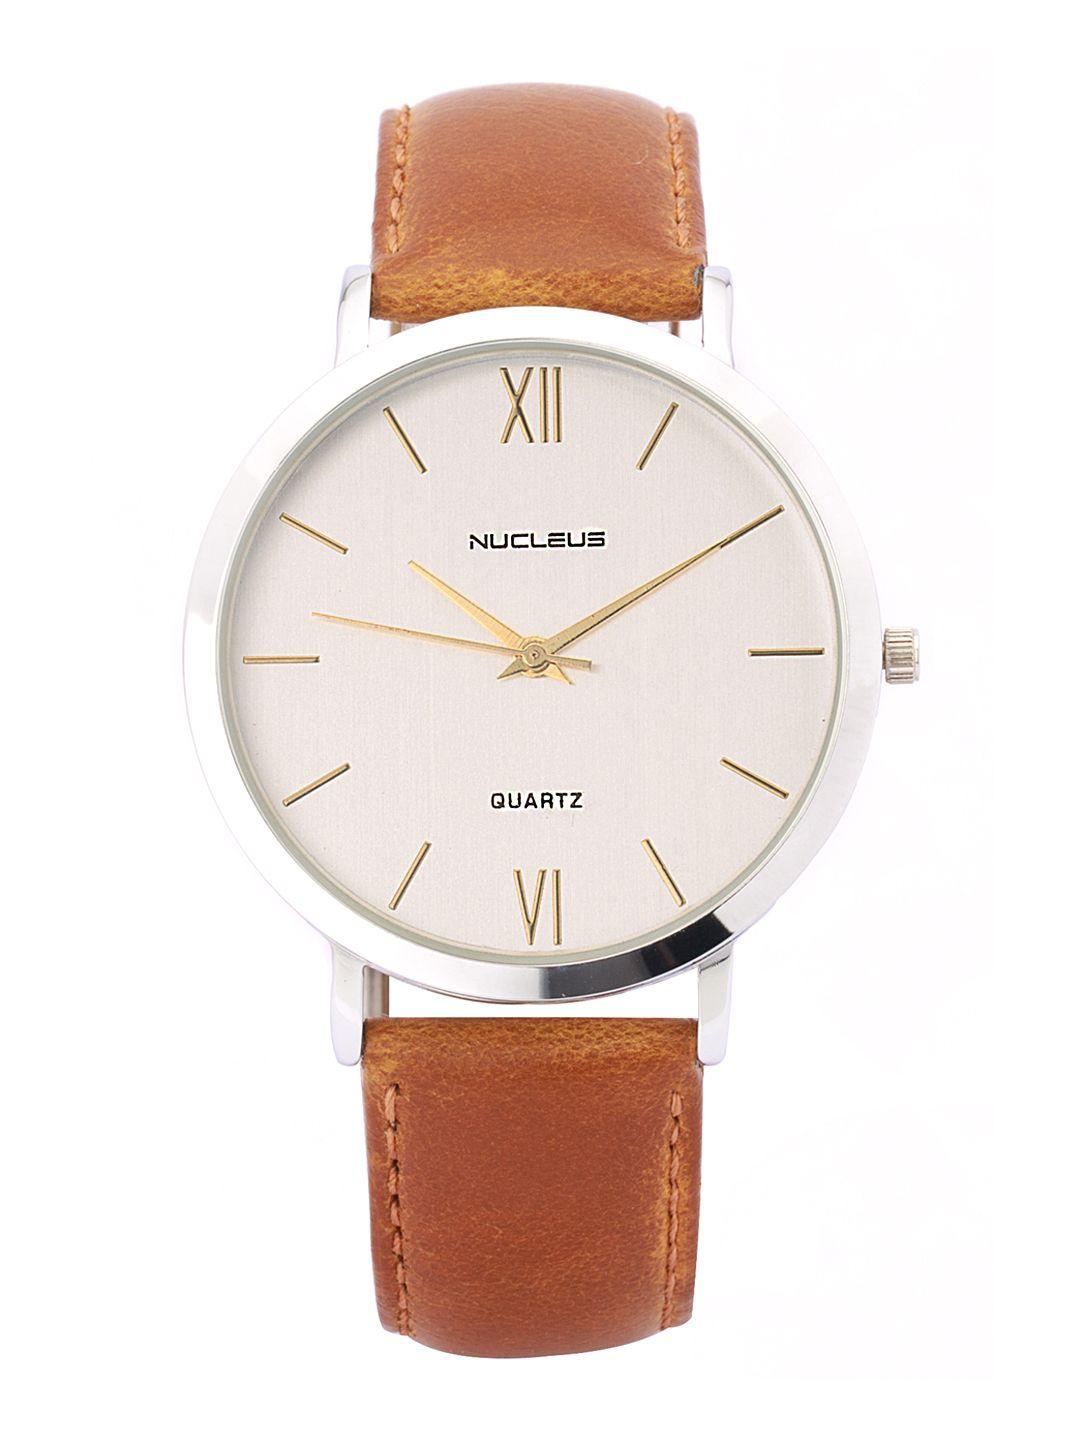 nucleus unisex silver-toned dial watch lssb